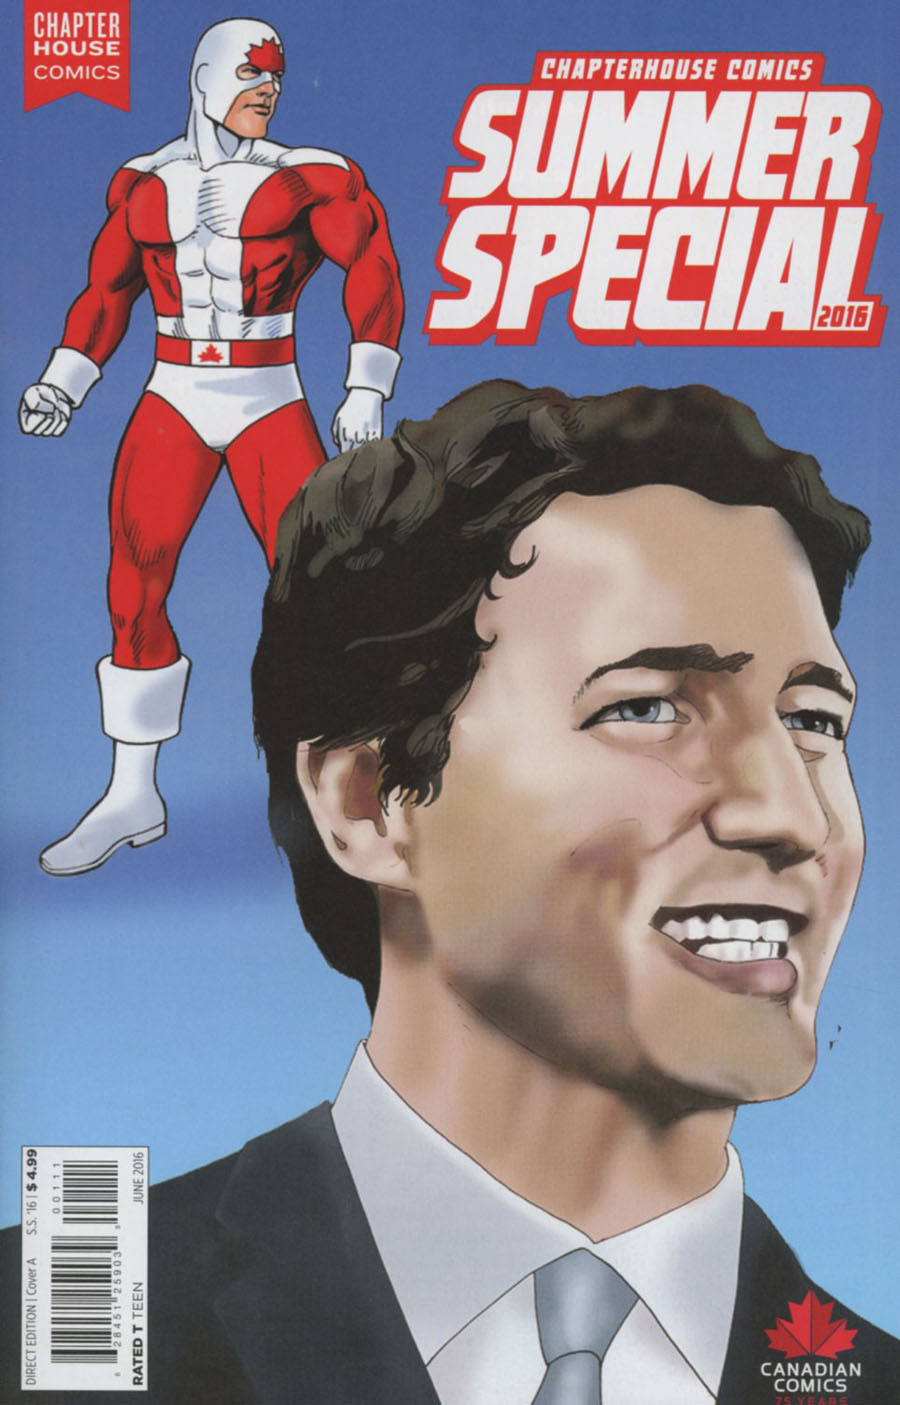 Chapterhouse Summer Special 2016 #1 Cover A Regular GB Trudeau Cover